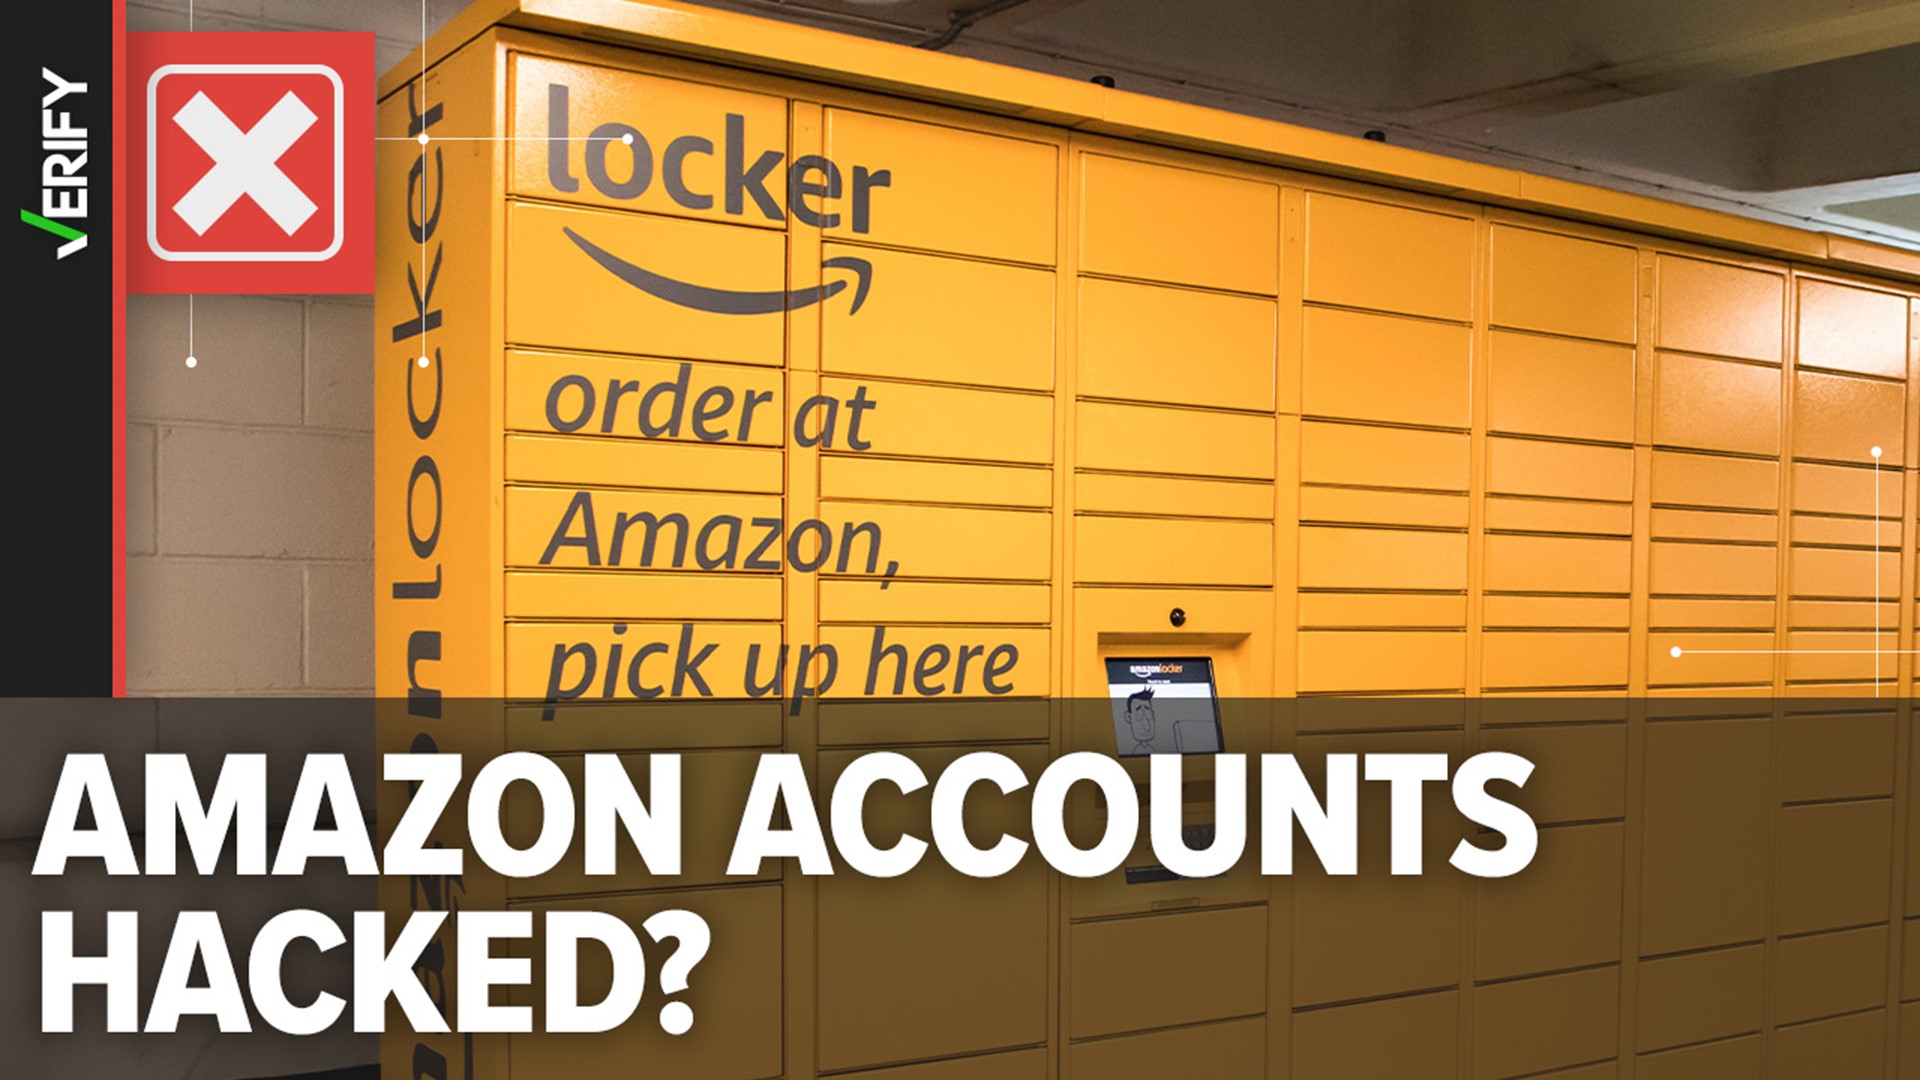 People online have been worried after finding Amazon locker locations added to their accounts. But the additional addresses aren’t from a hack.